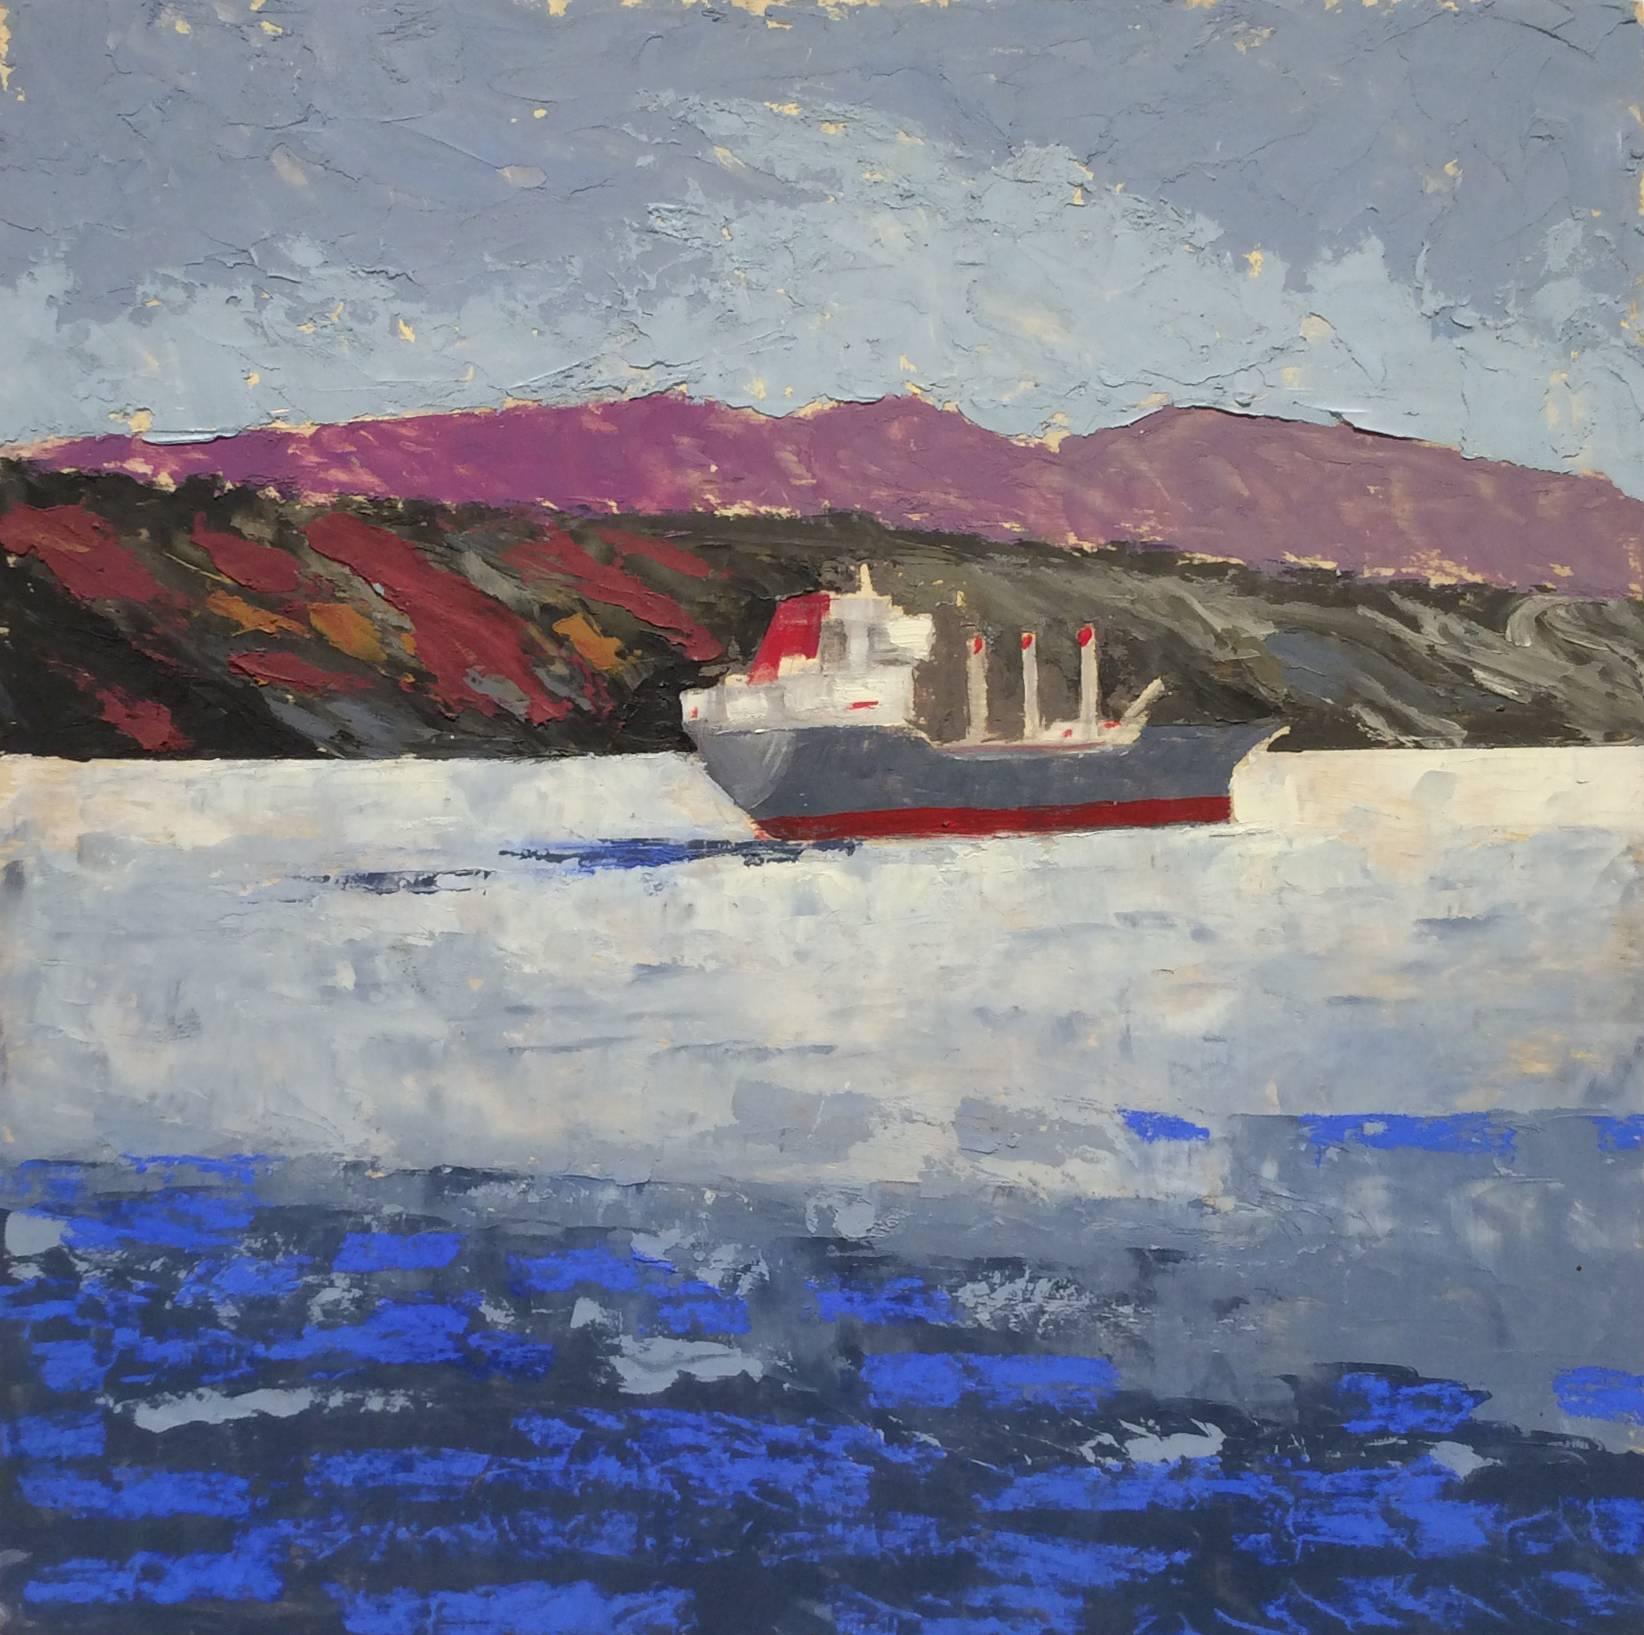 12 x 12 inches unframed
oil on wood panel

This modern, impressionistic style landscape oil painting on wood panel of a barge on the Hudson River was painted by Rhinecliff, NY-based artist Joseph Maresca in 2014. The artist lives on the coast of the